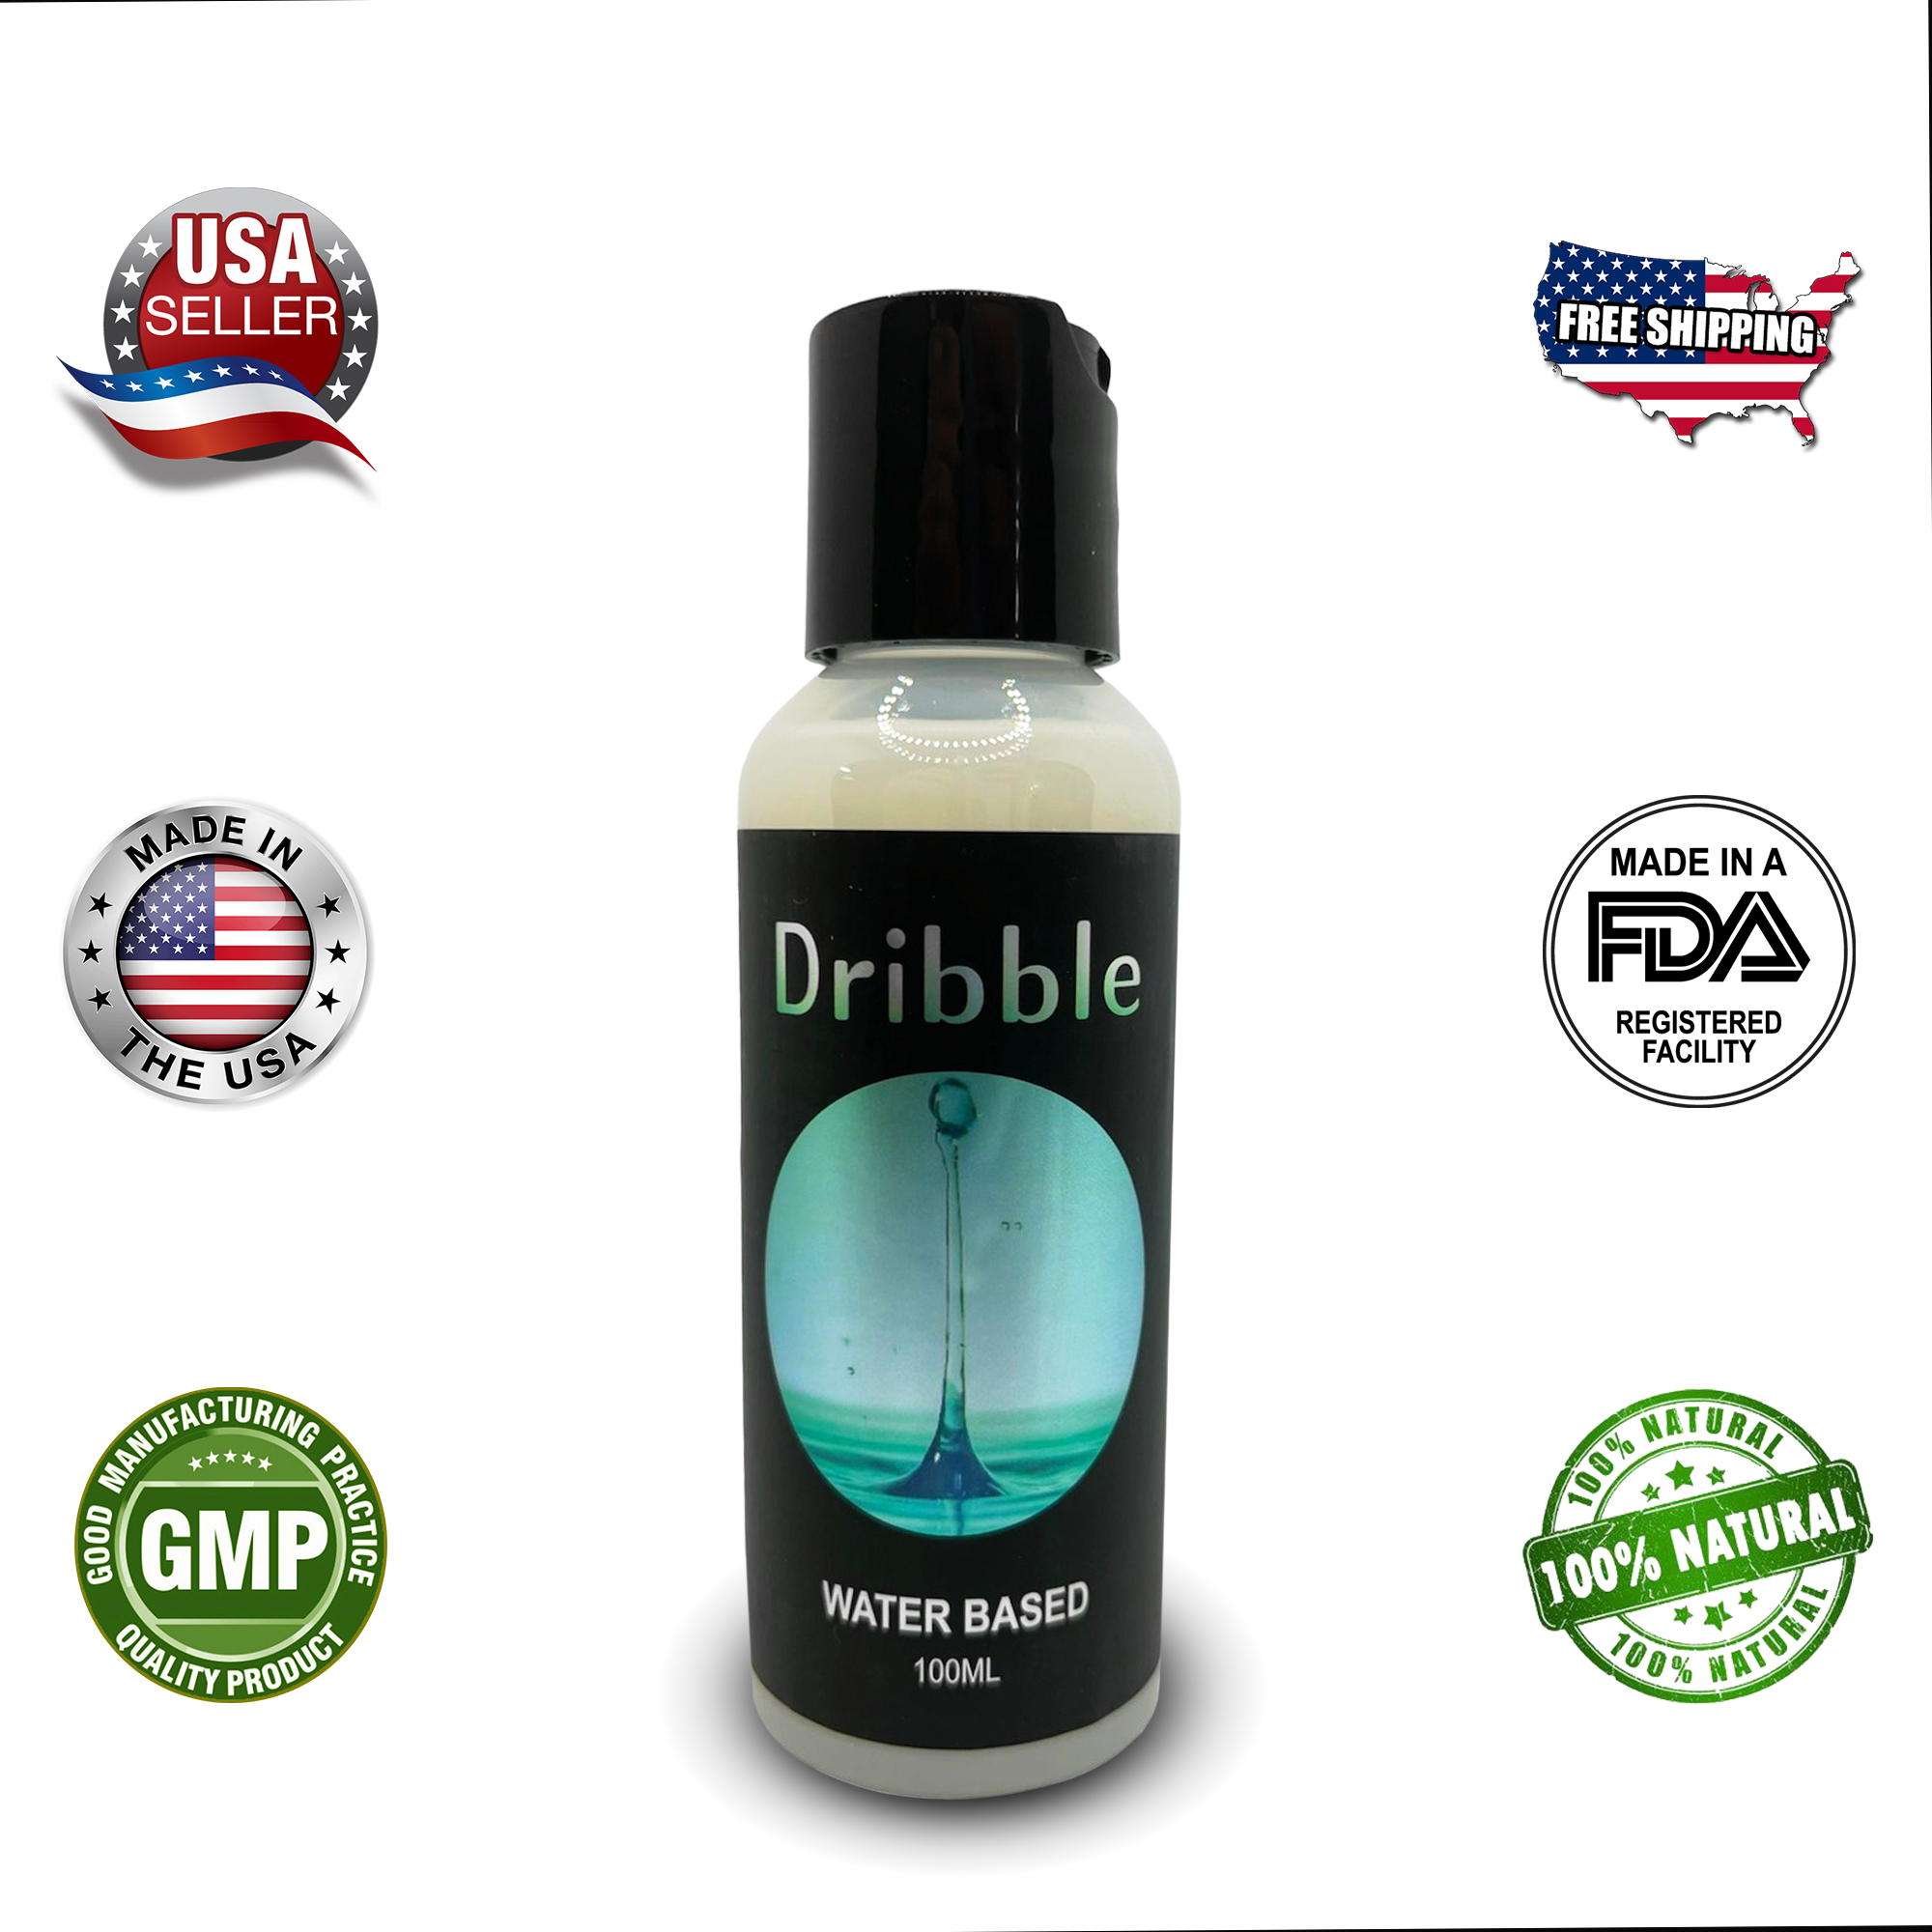 Dribble Water Based Lube Luxury form, Men & Women Limited Edition